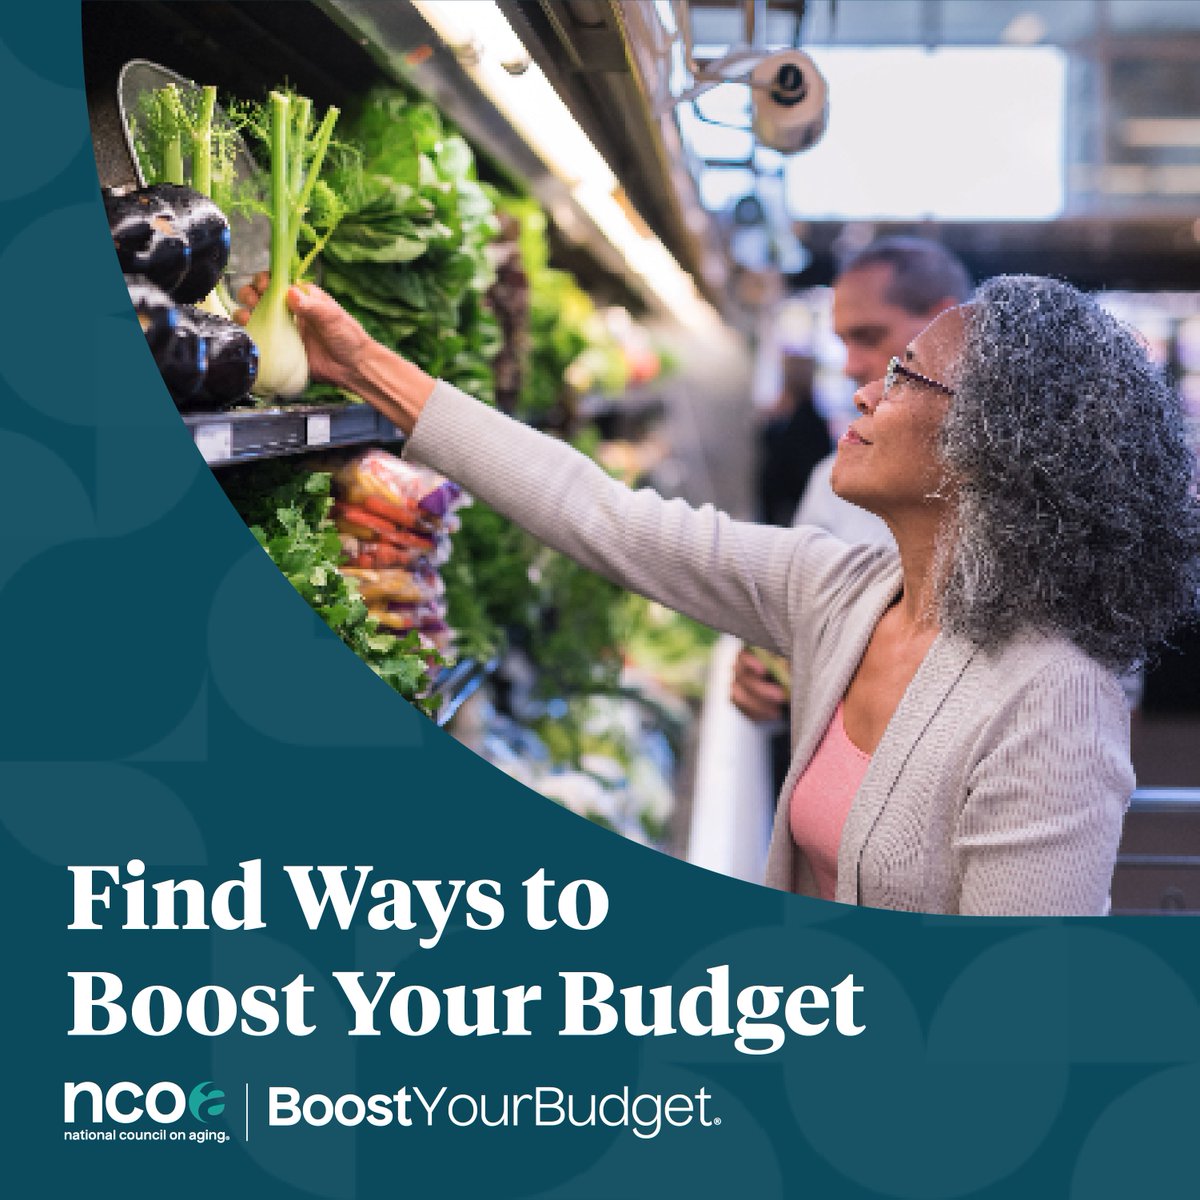 It's #boostyourbudgetweek! Benefits are available to  assist you with the ever increasing cost of food, rent, utilities and medical expenses.  To see if you're eligible,  reach out to @liveonny's Benefits Outreach Program at (212) 398-5045 or benefits@liveon-ny.org.